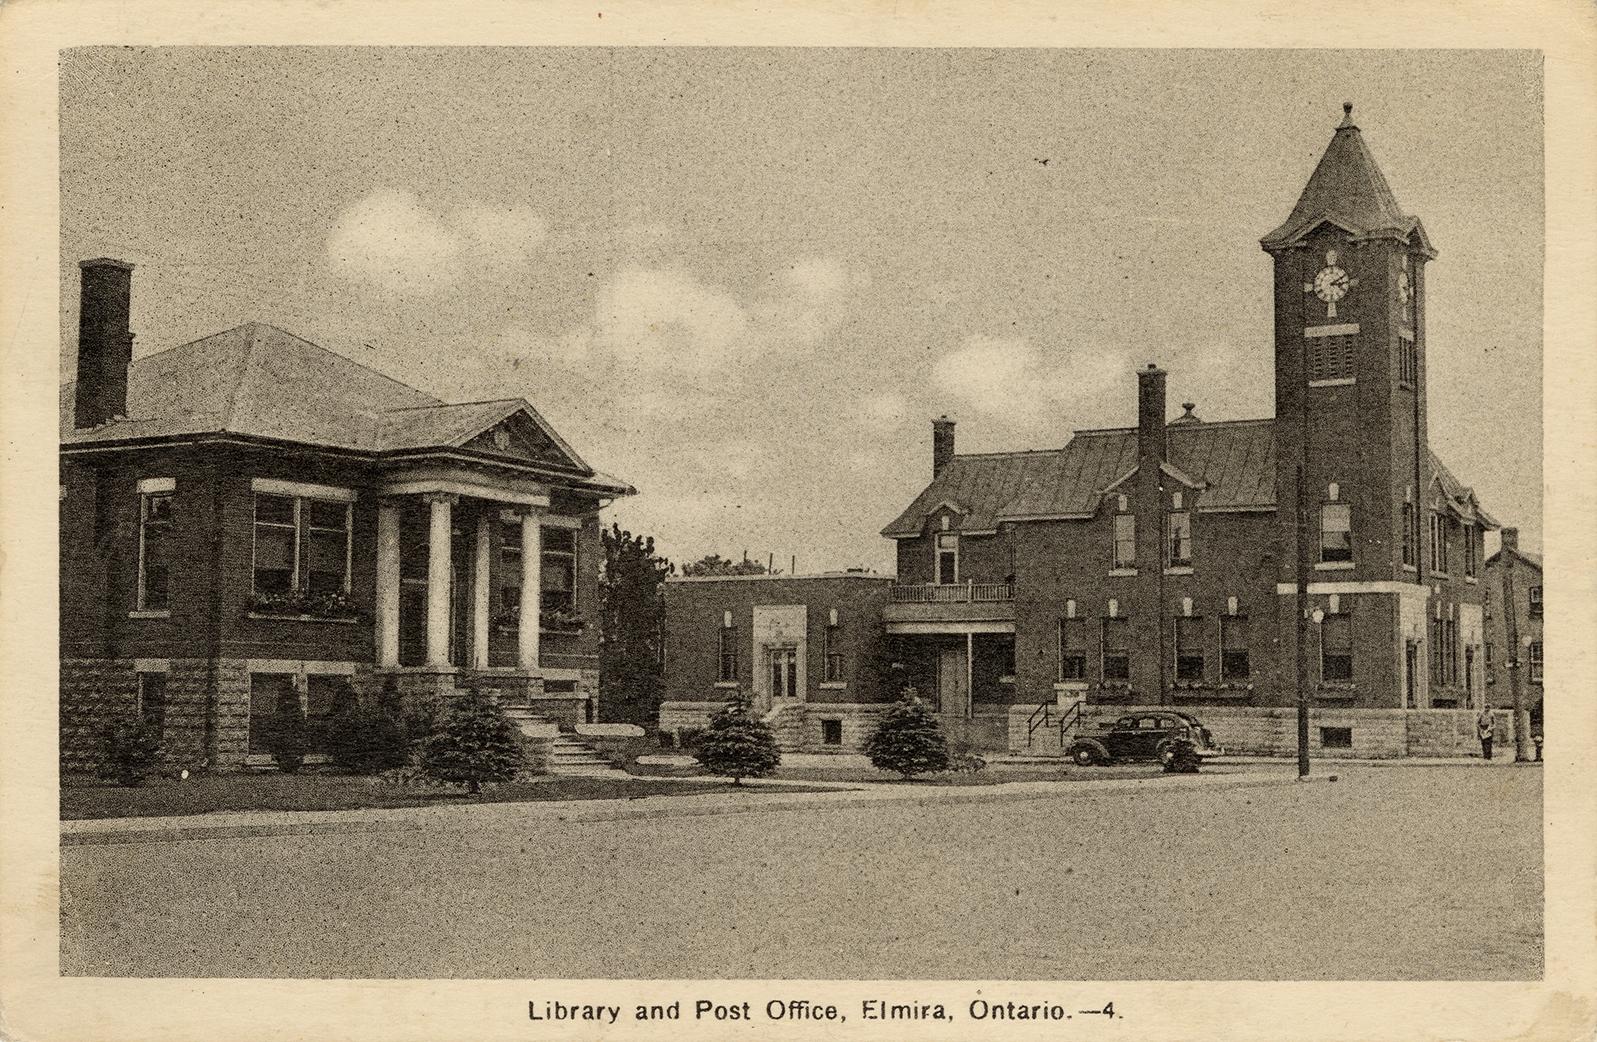 Picture of wide street showing public library building and post office building to the right. 